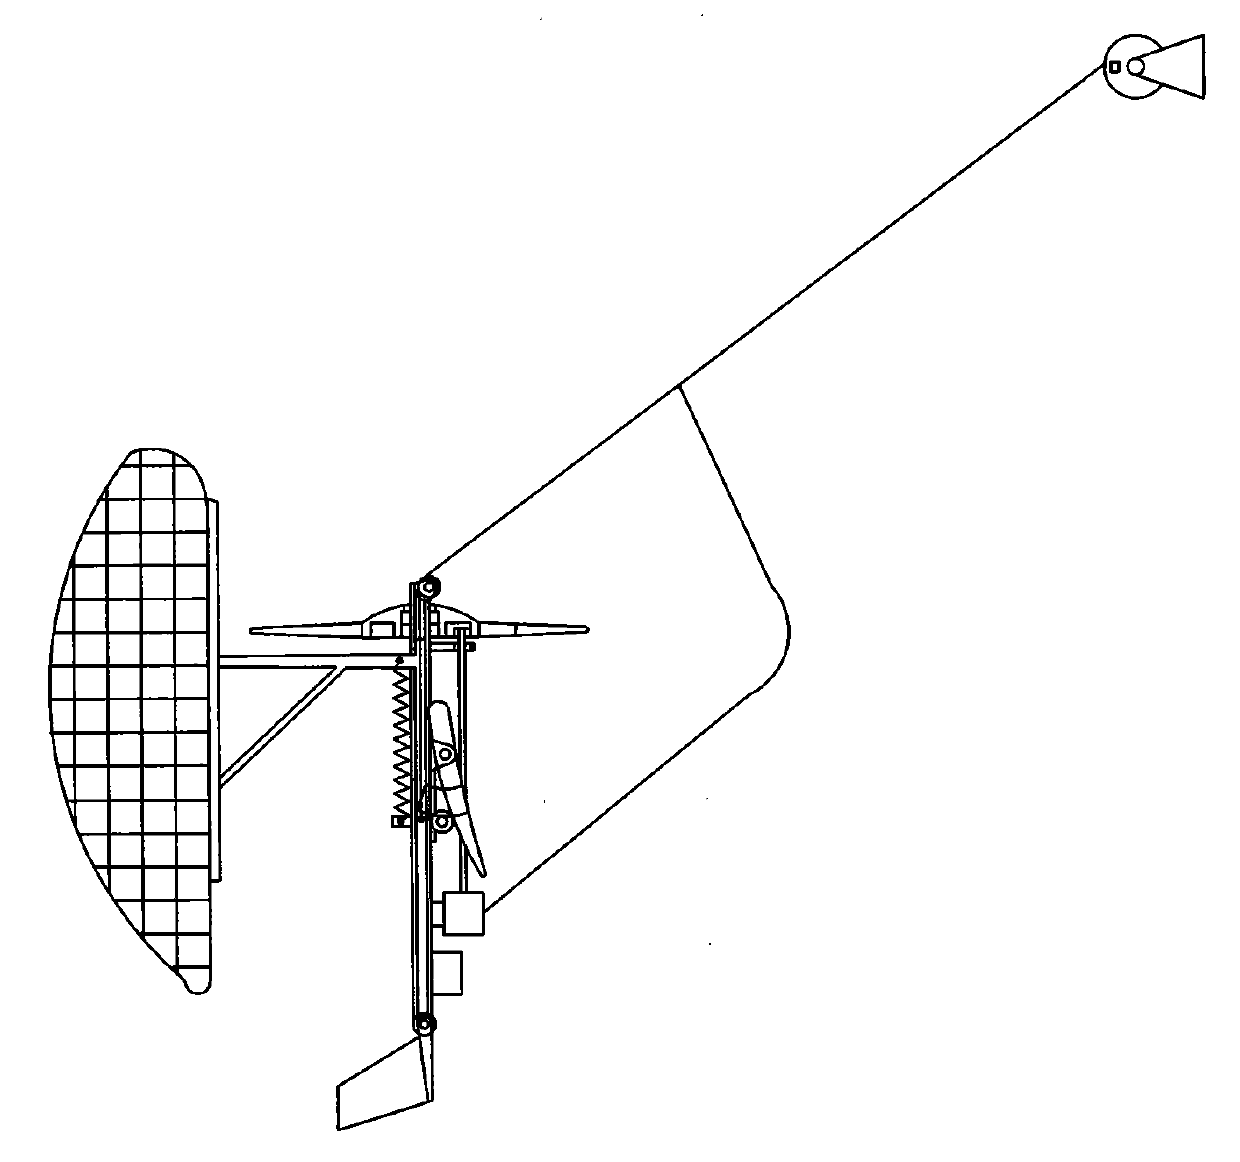 Aircraft and airship type high-altitude wind power generation device